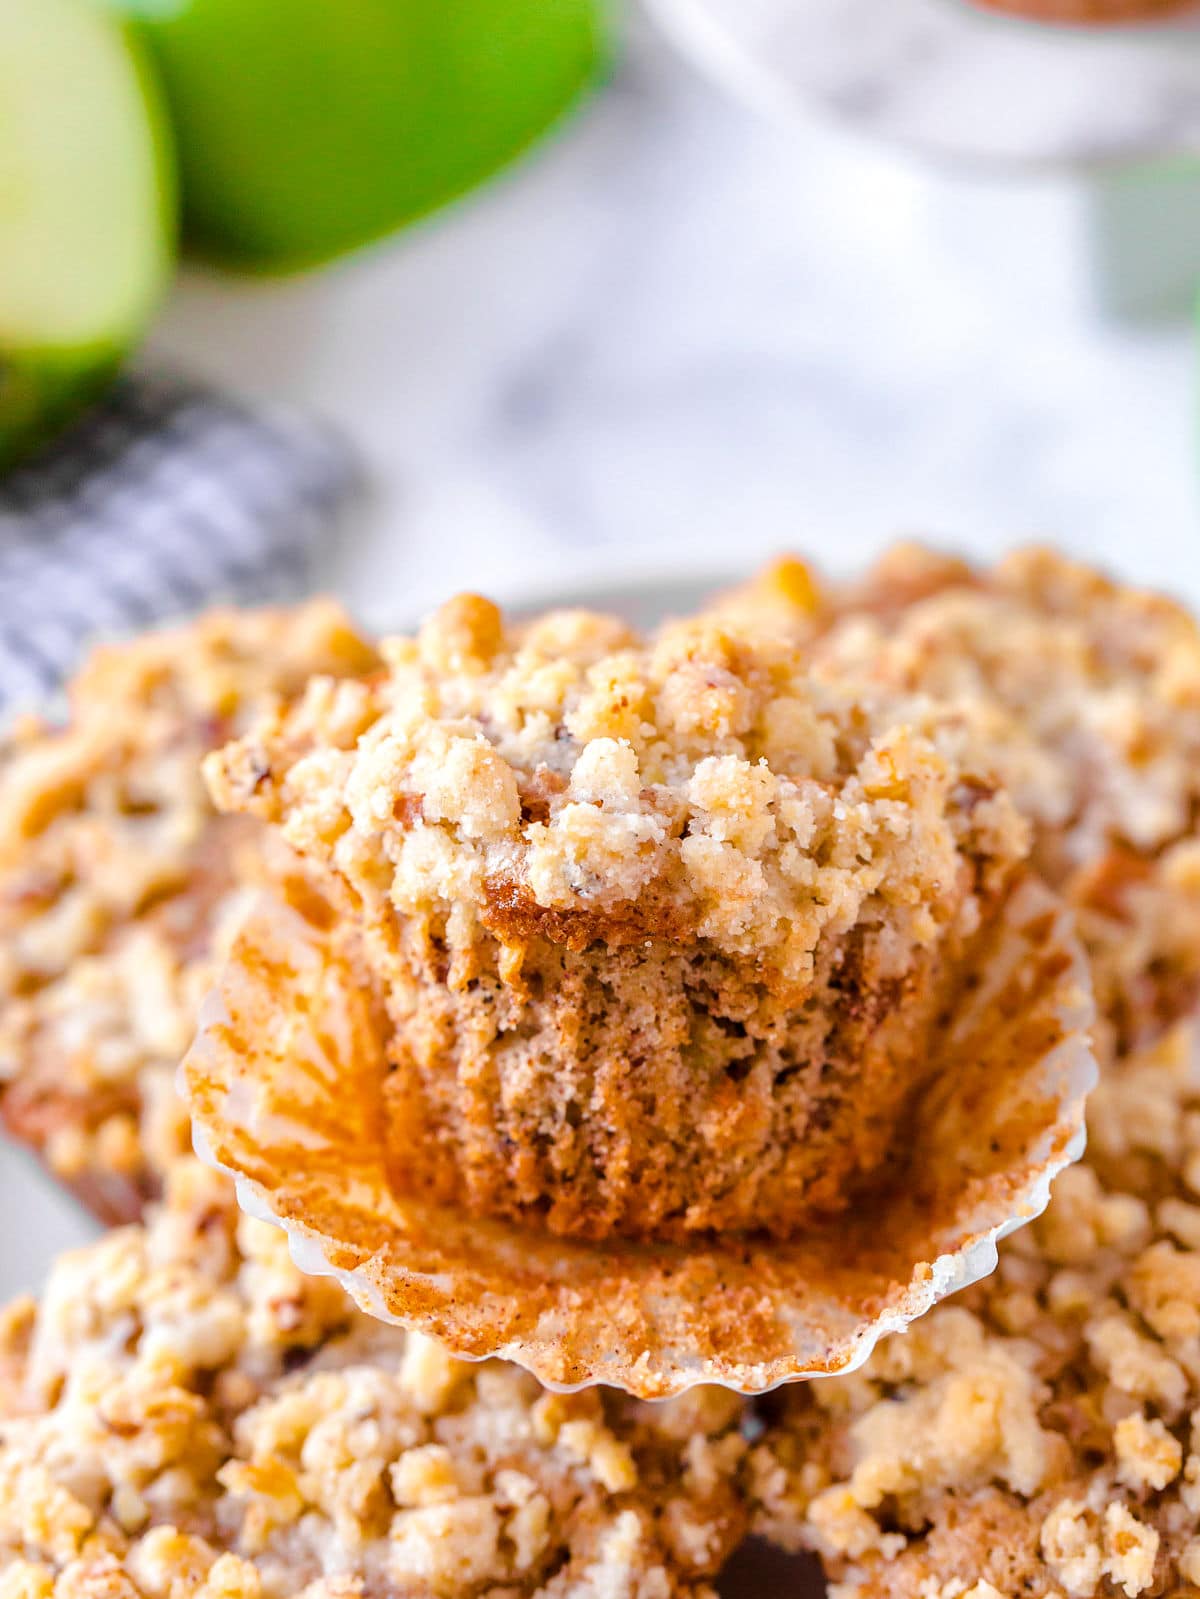 apple muffin unwrapped sitting on a plate of muffins